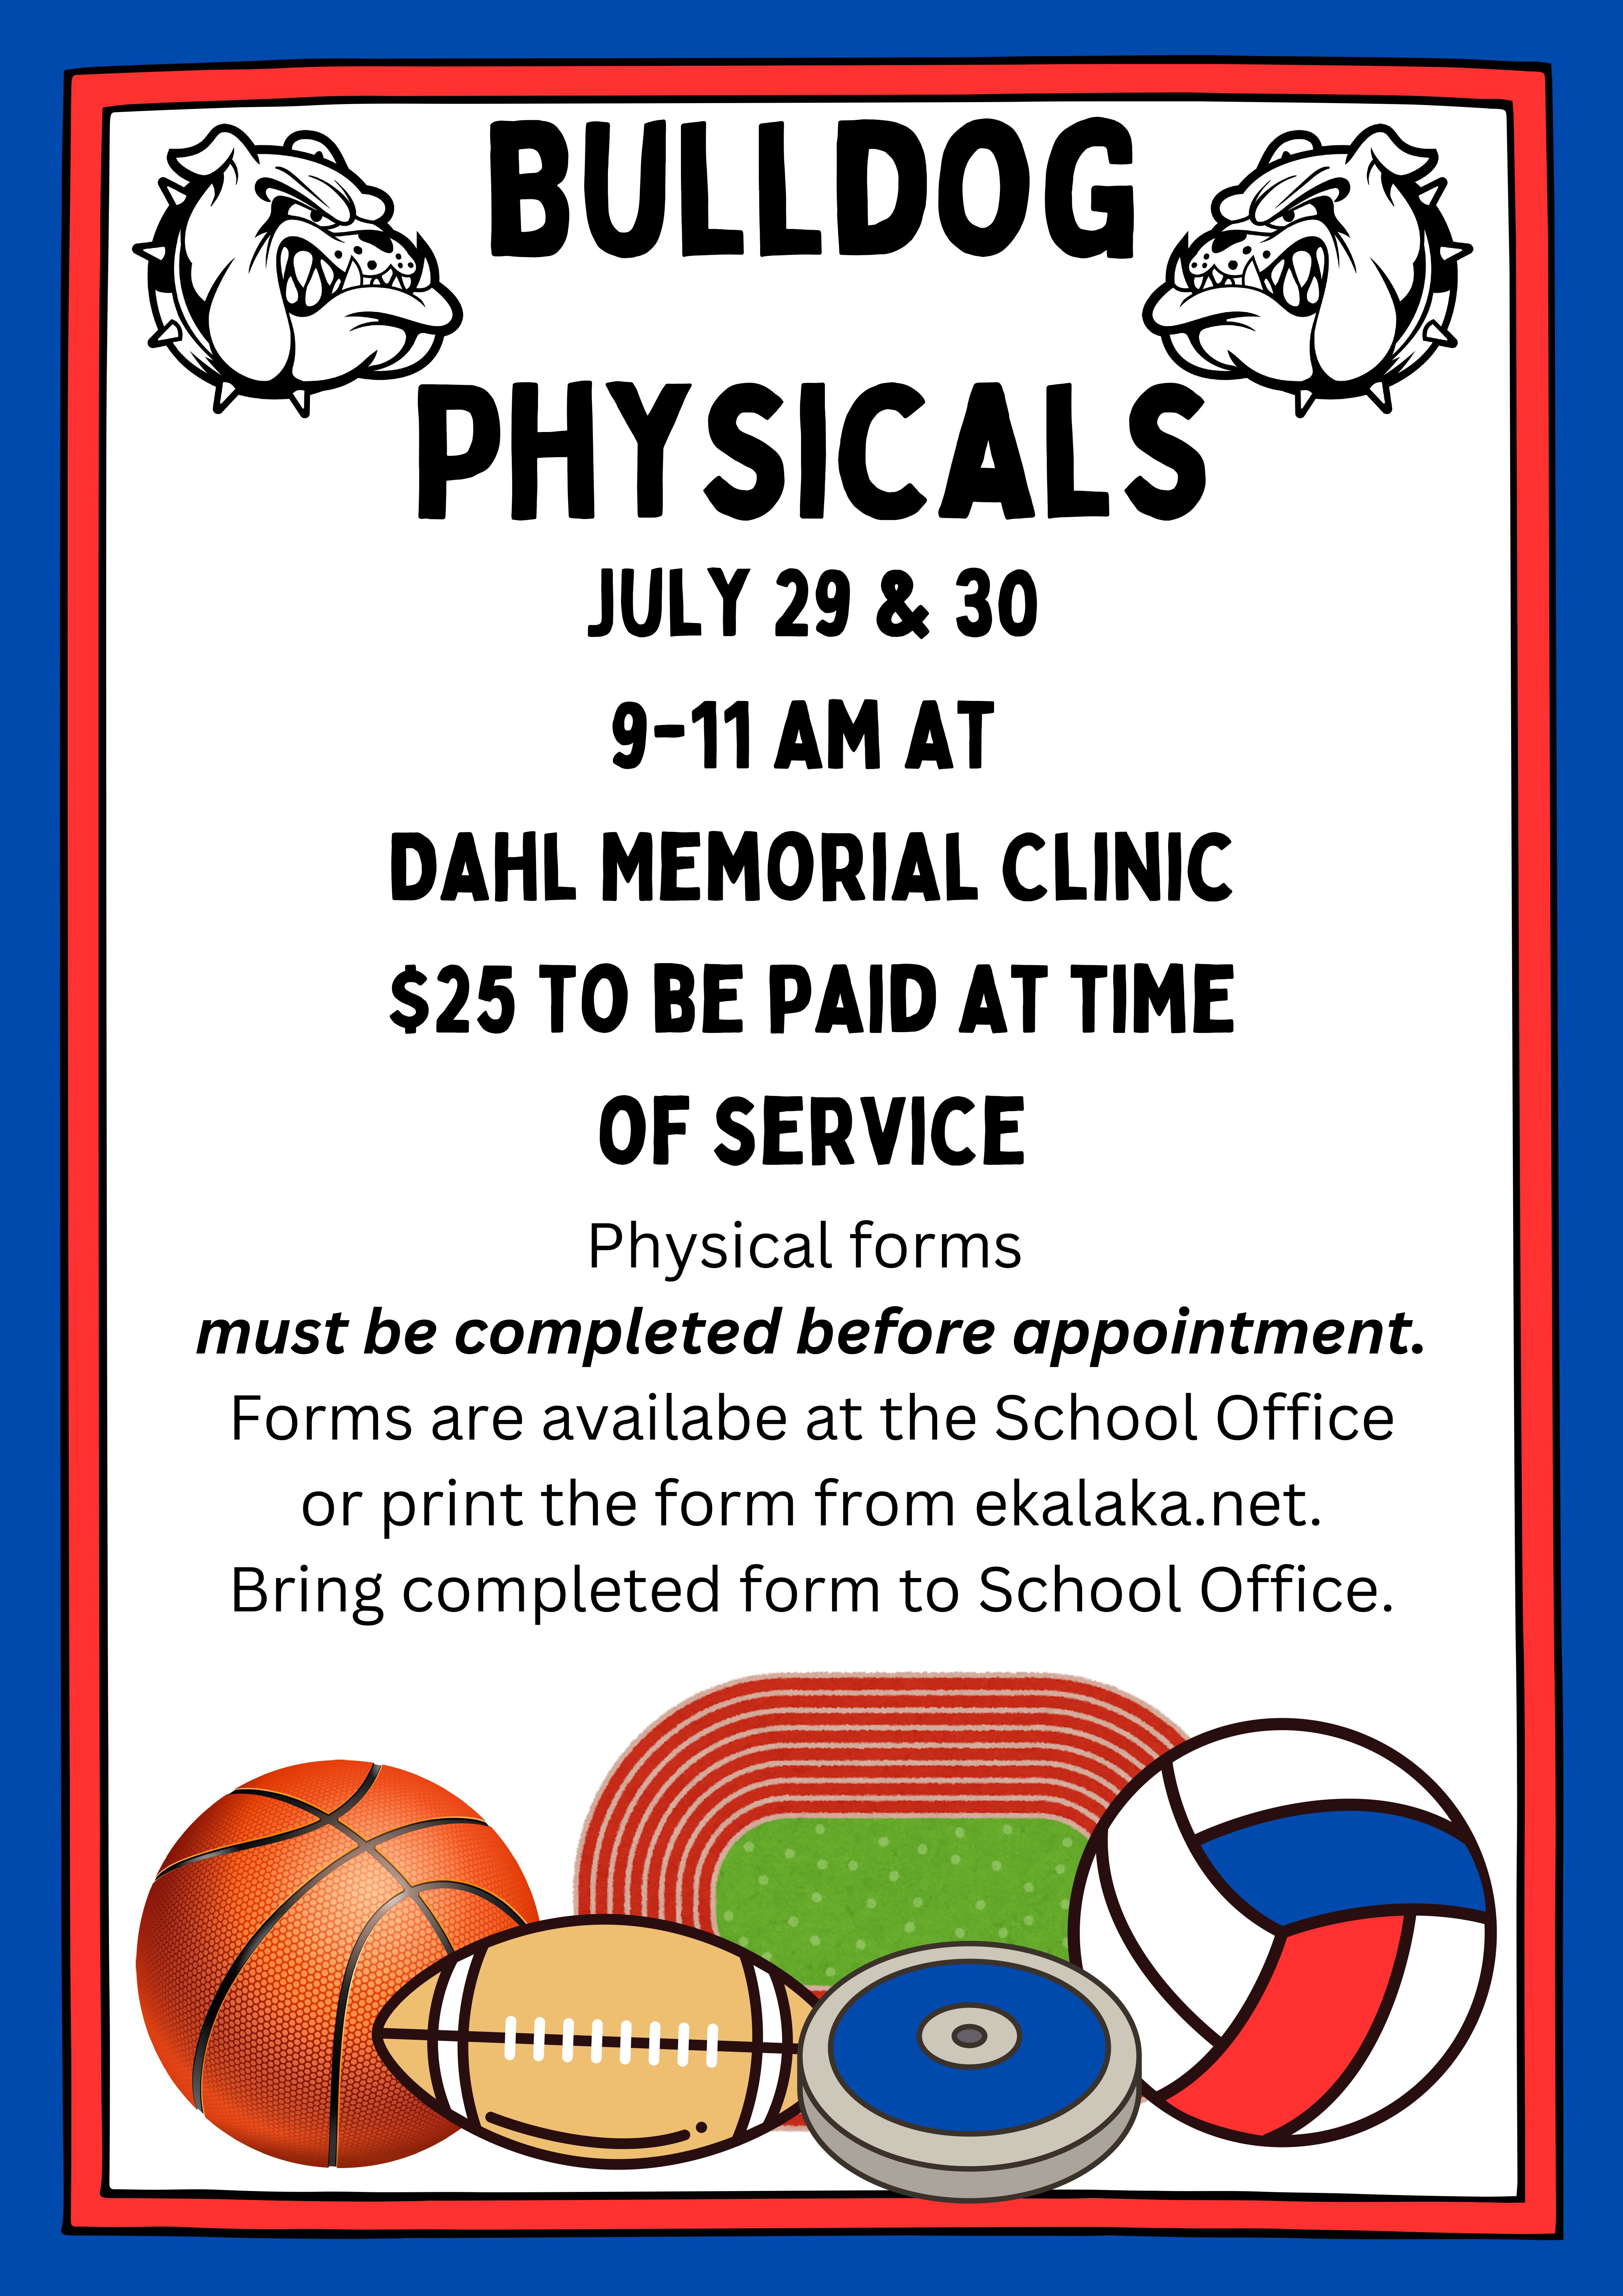 Bulldog  Physicals  July 29 & 30  9-11 am at  Dahl Memorial Clinic  $25 to be paid at time  of service  Physical forms  must be completed before appointment. Forms are availabe at the School Office  or print the form from ekalaka.net.  Bring completed form to School Office.